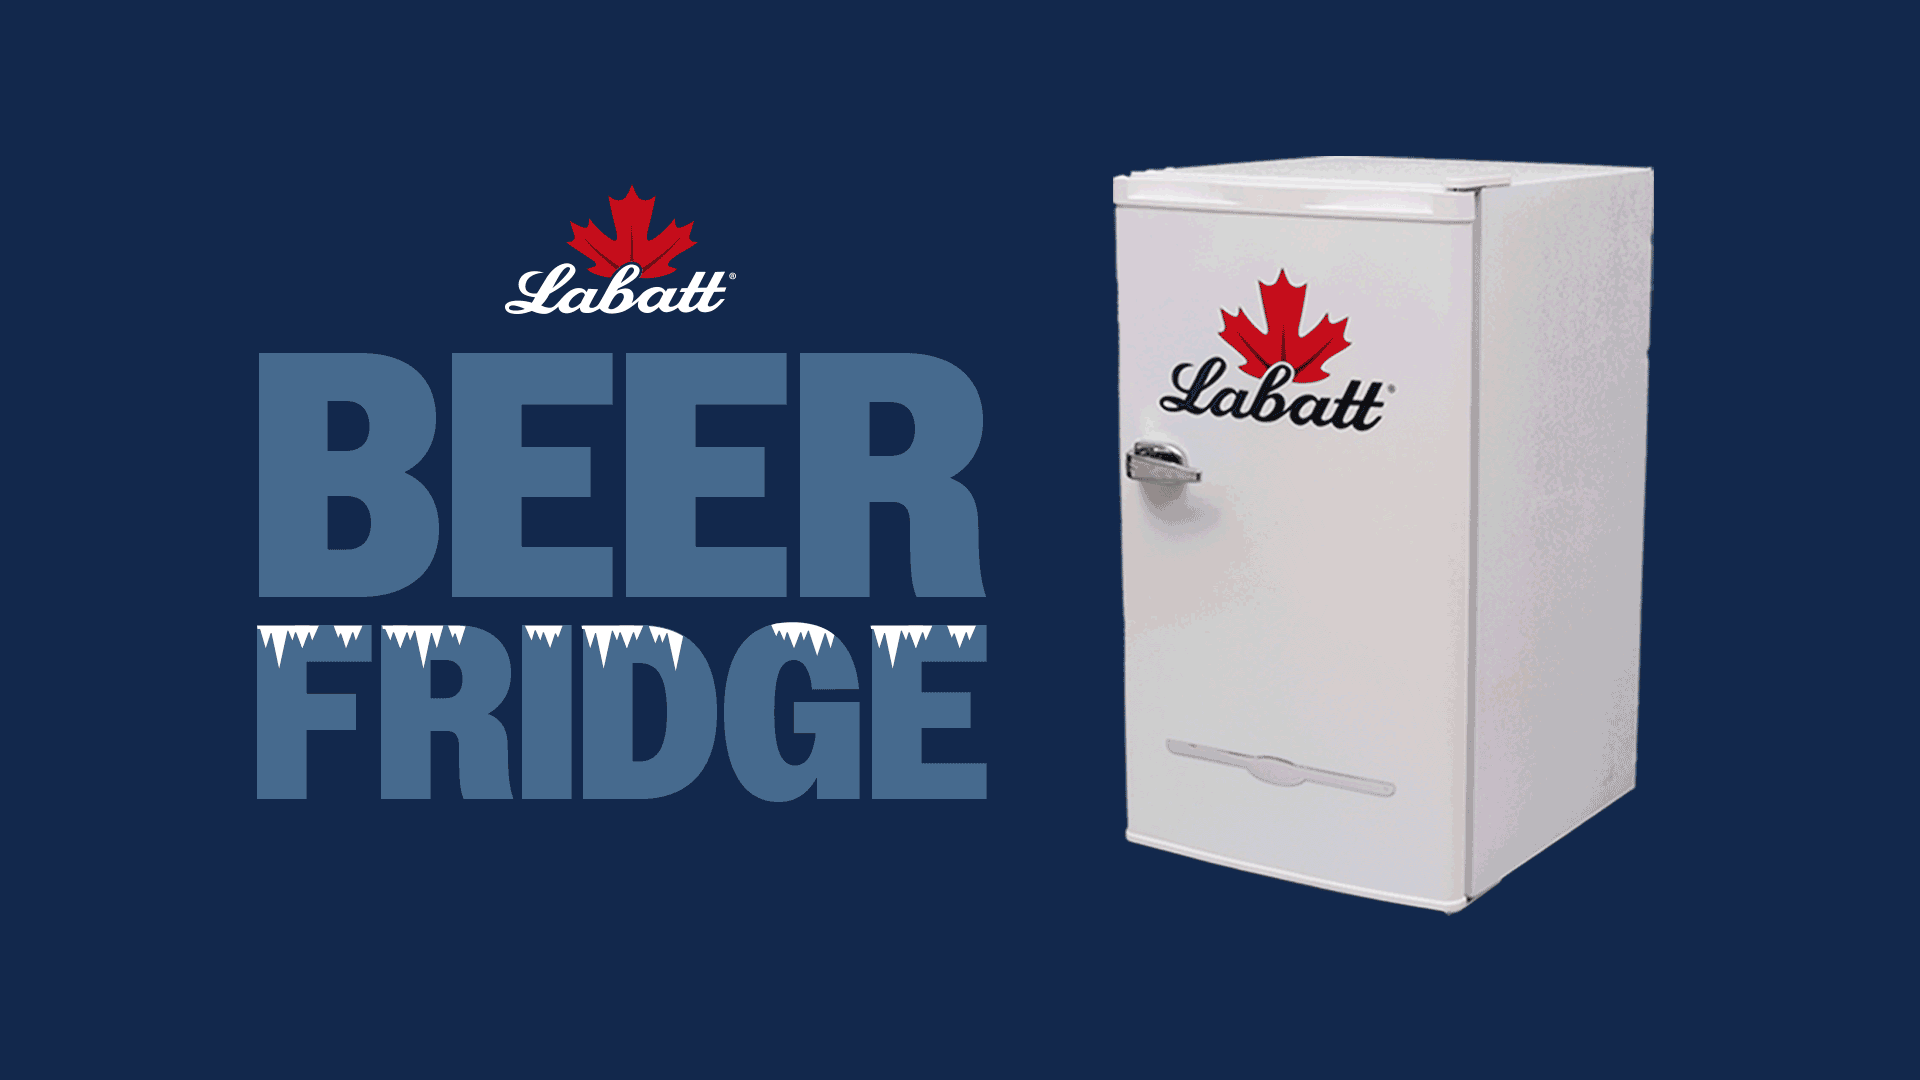 Enter for a chance to win a Labatt branded beer fridge.